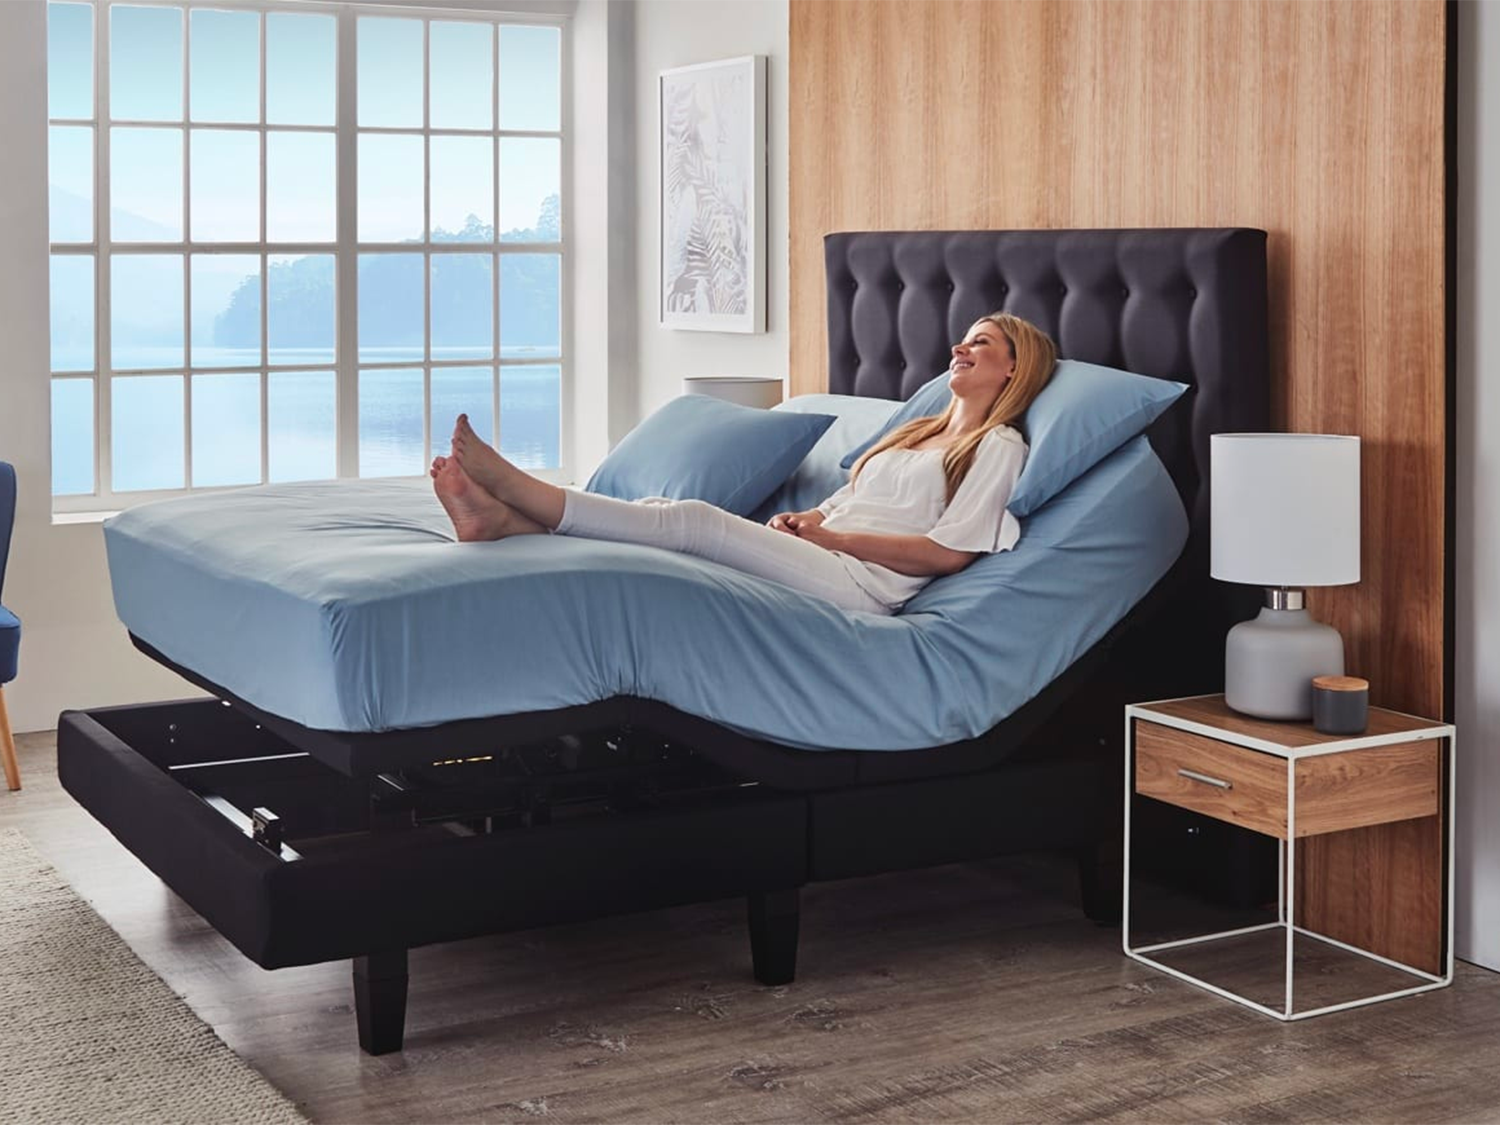 Napp Adjustable Beds vs Perfect Fit/As Seen on TV/Bambillo